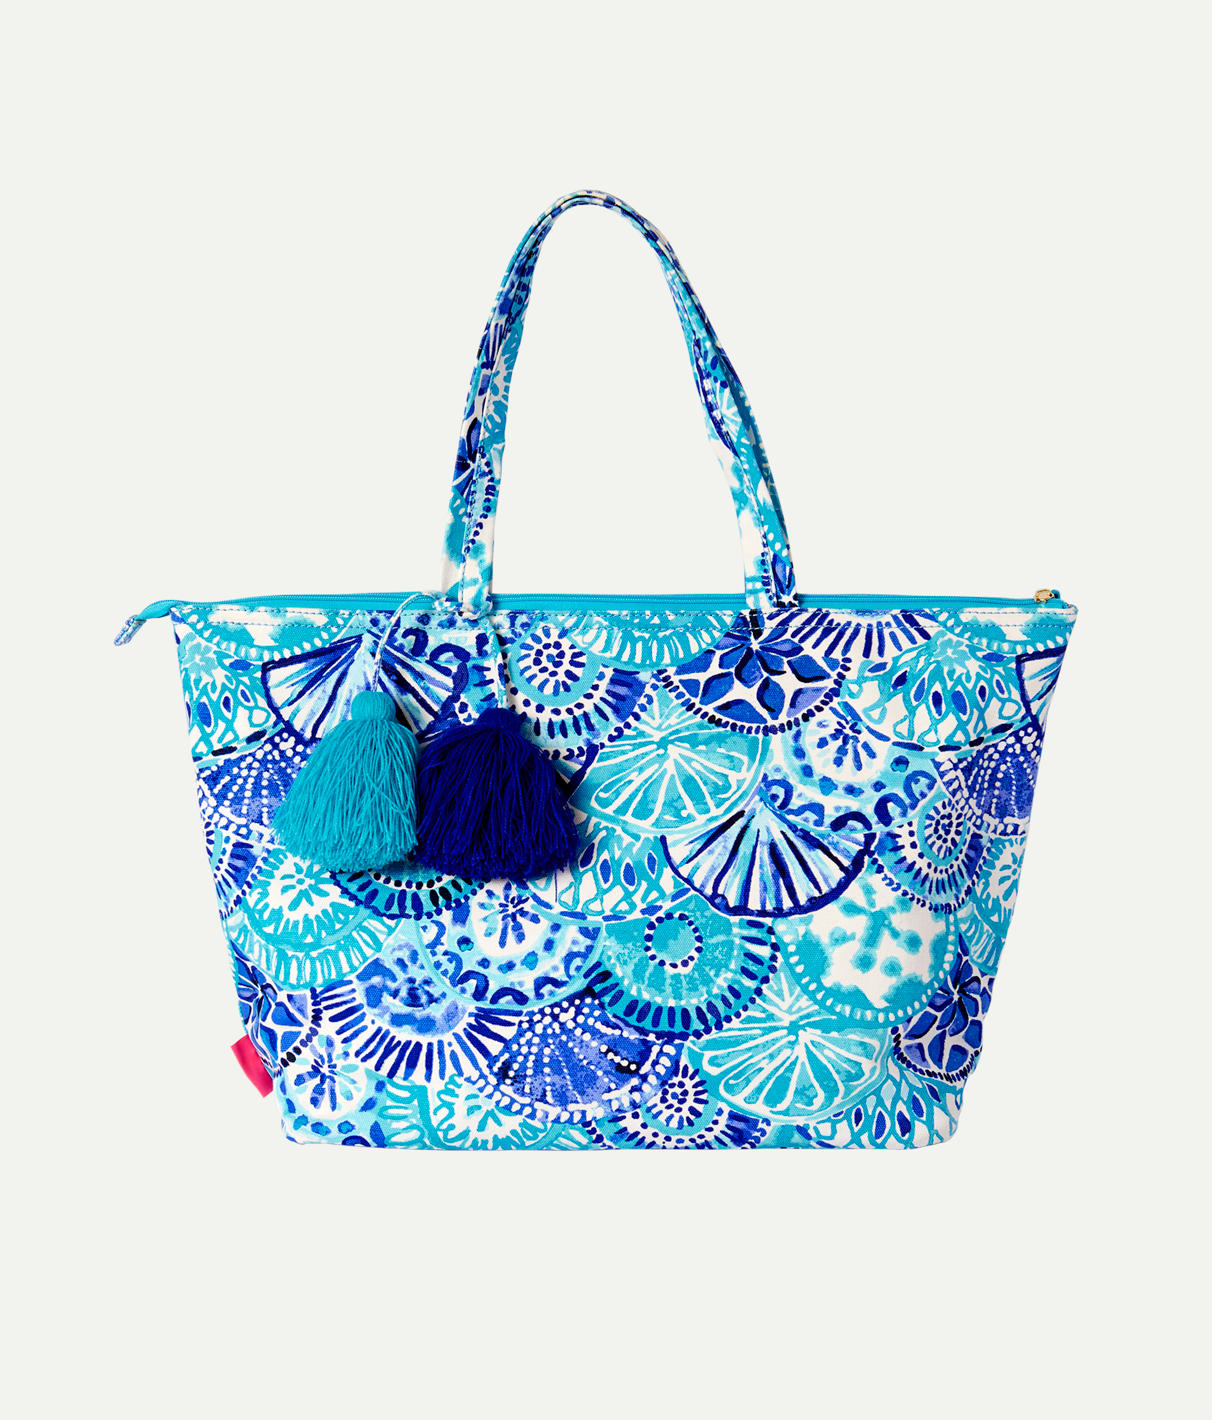 LILLY PULITZER WOMEN'S PALM BEACH ZIP UP TOTE BAG IN BLUE, LILLY LOVES NANTUCKET - LILLY PULITZER,001292